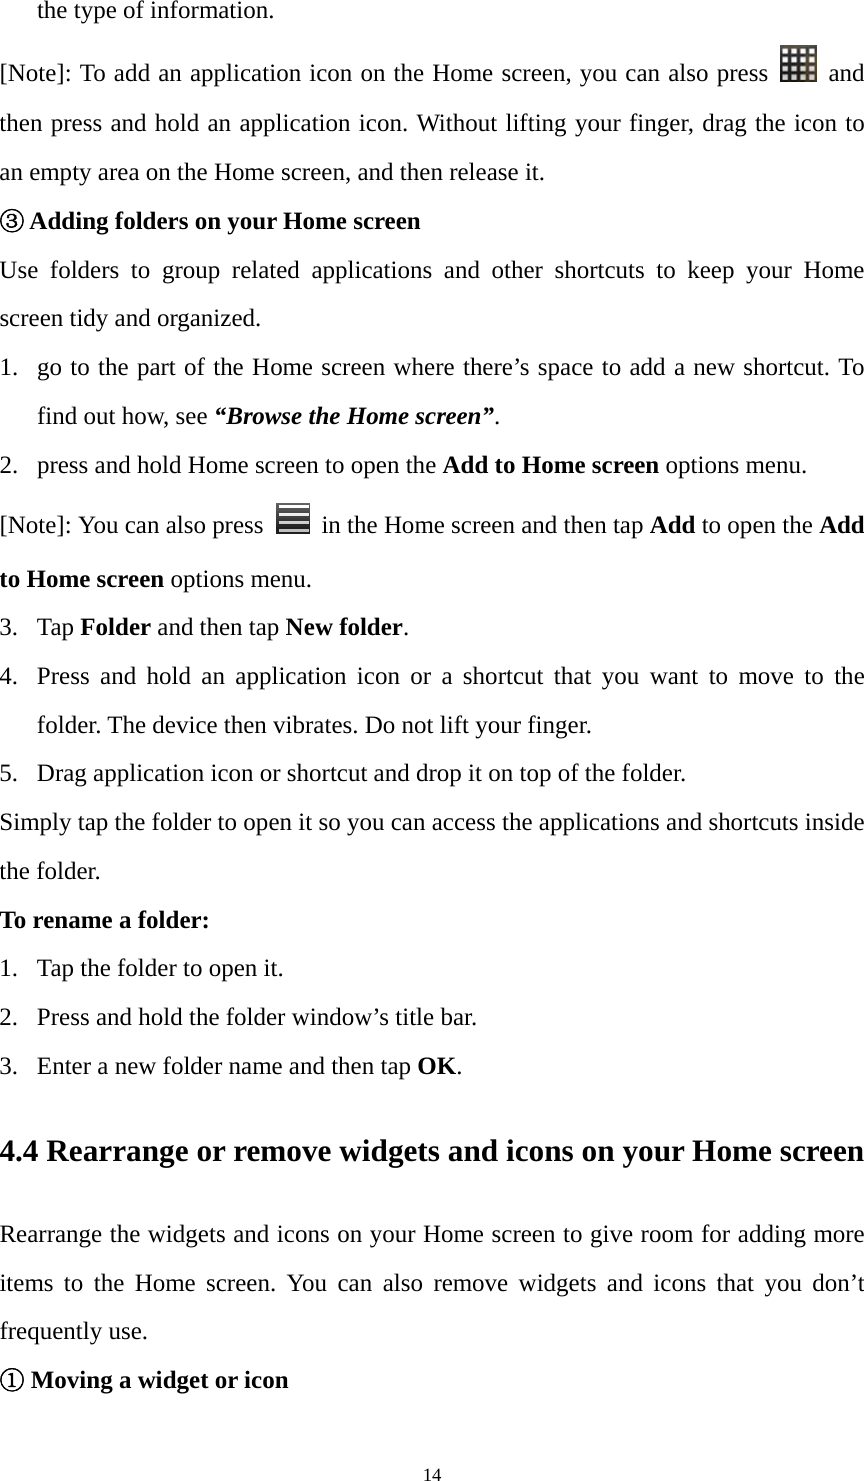 14 the type of information. [Note]: To add an application icon on the Home screen, you can also press   and then press and hold an application icon. Without lifting your finger, drag the icon to an empty area on the Home screen, and then release it.   ③ Adding folders on your Home screen Use folders to group related applications and other shortcuts to keep your Home screen tidy and organized. 1. go to the part of the Home screen where there’s space to add a new shortcut. To find out how, see “Browse the Home screen”. 2. press and hold Home screen to open the Add to Home screen options menu.   [Note]: You can also press    in the Home screen and then tap Add to open the Add to Home screen options menu. 3. Tap Folder and then tap New folder. 4. Press and hold an application icon or a shortcut that you want to move to the folder. The device then vibrates. Do not lift your finger. 5. Drag application icon or shortcut and drop it on top of the folder.   Simply tap the folder to open it so you can access the applications and shortcuts inside the folder. To rename a folder: 1. Tap the folder to open it. 2. Press and hold the folder window’s title bar.   3. Enter a new folder name and then tap OK. 4.4 Rearrange or remove widgets and icons on your Home screen Rearrange the widgets and icons on your Home screen to give room for adding more items to the Home screen. You can also remove widgets and icons that you don’t frequently use. ① Moving a widget or icon 